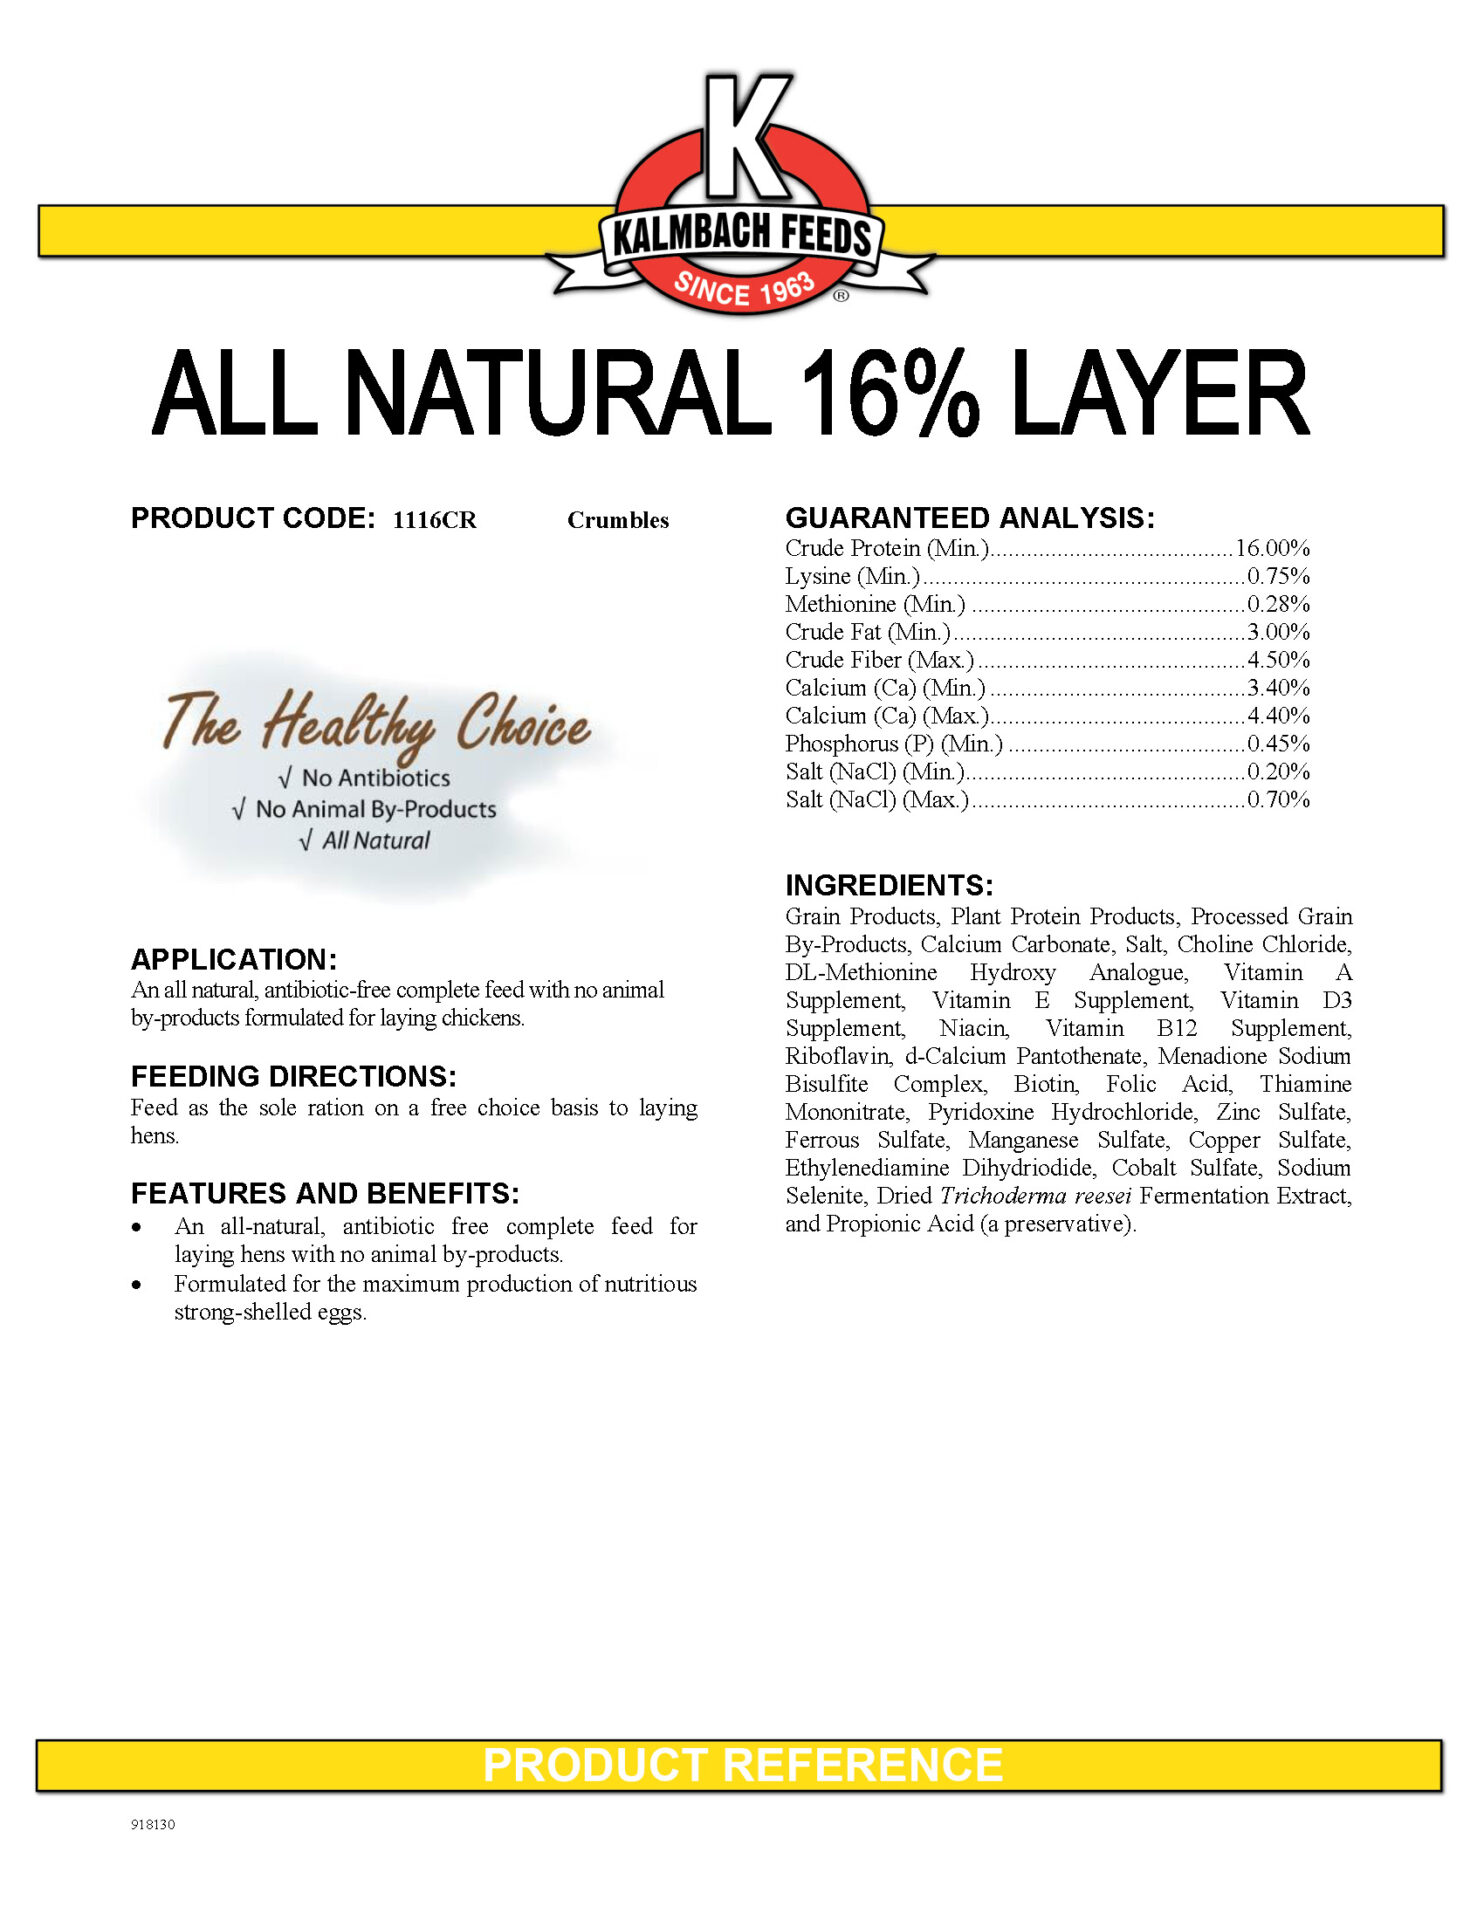 All Natural 16% Layer feed spec sheet